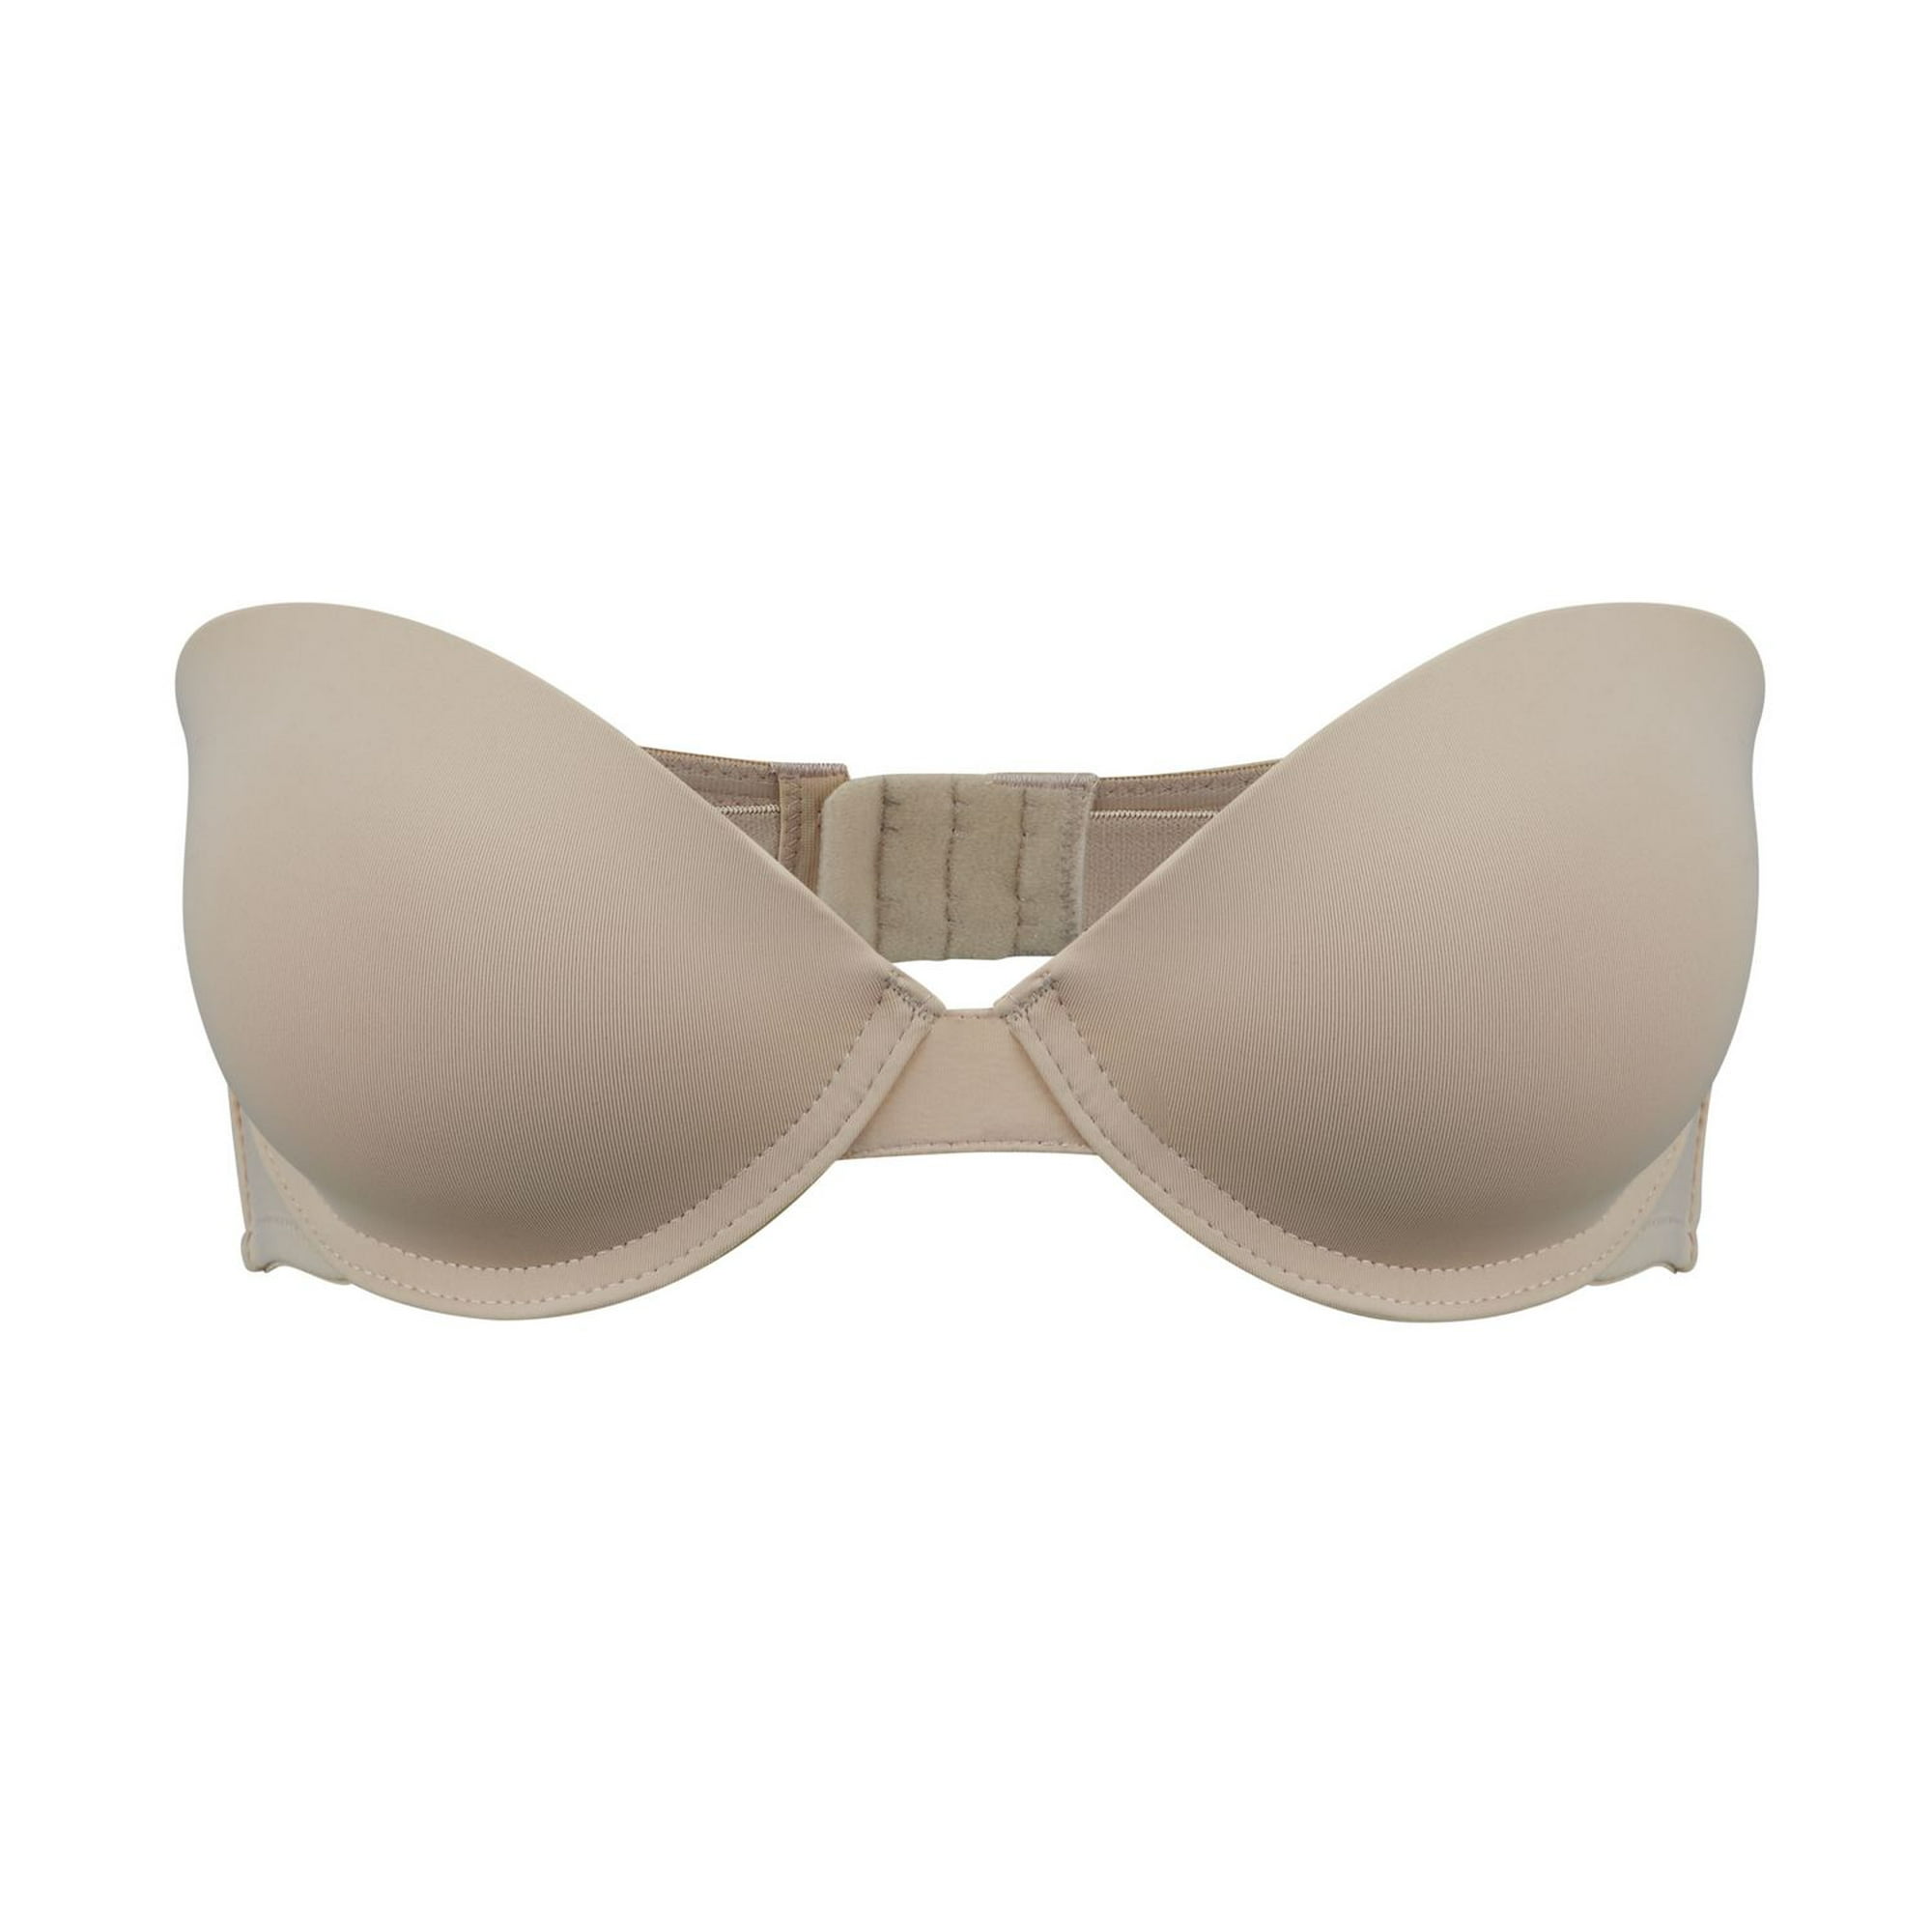 T-Shirt Bra - Buy T-Shirt Bras Online By Price, Size & Type – tagged 34C  – Page 3